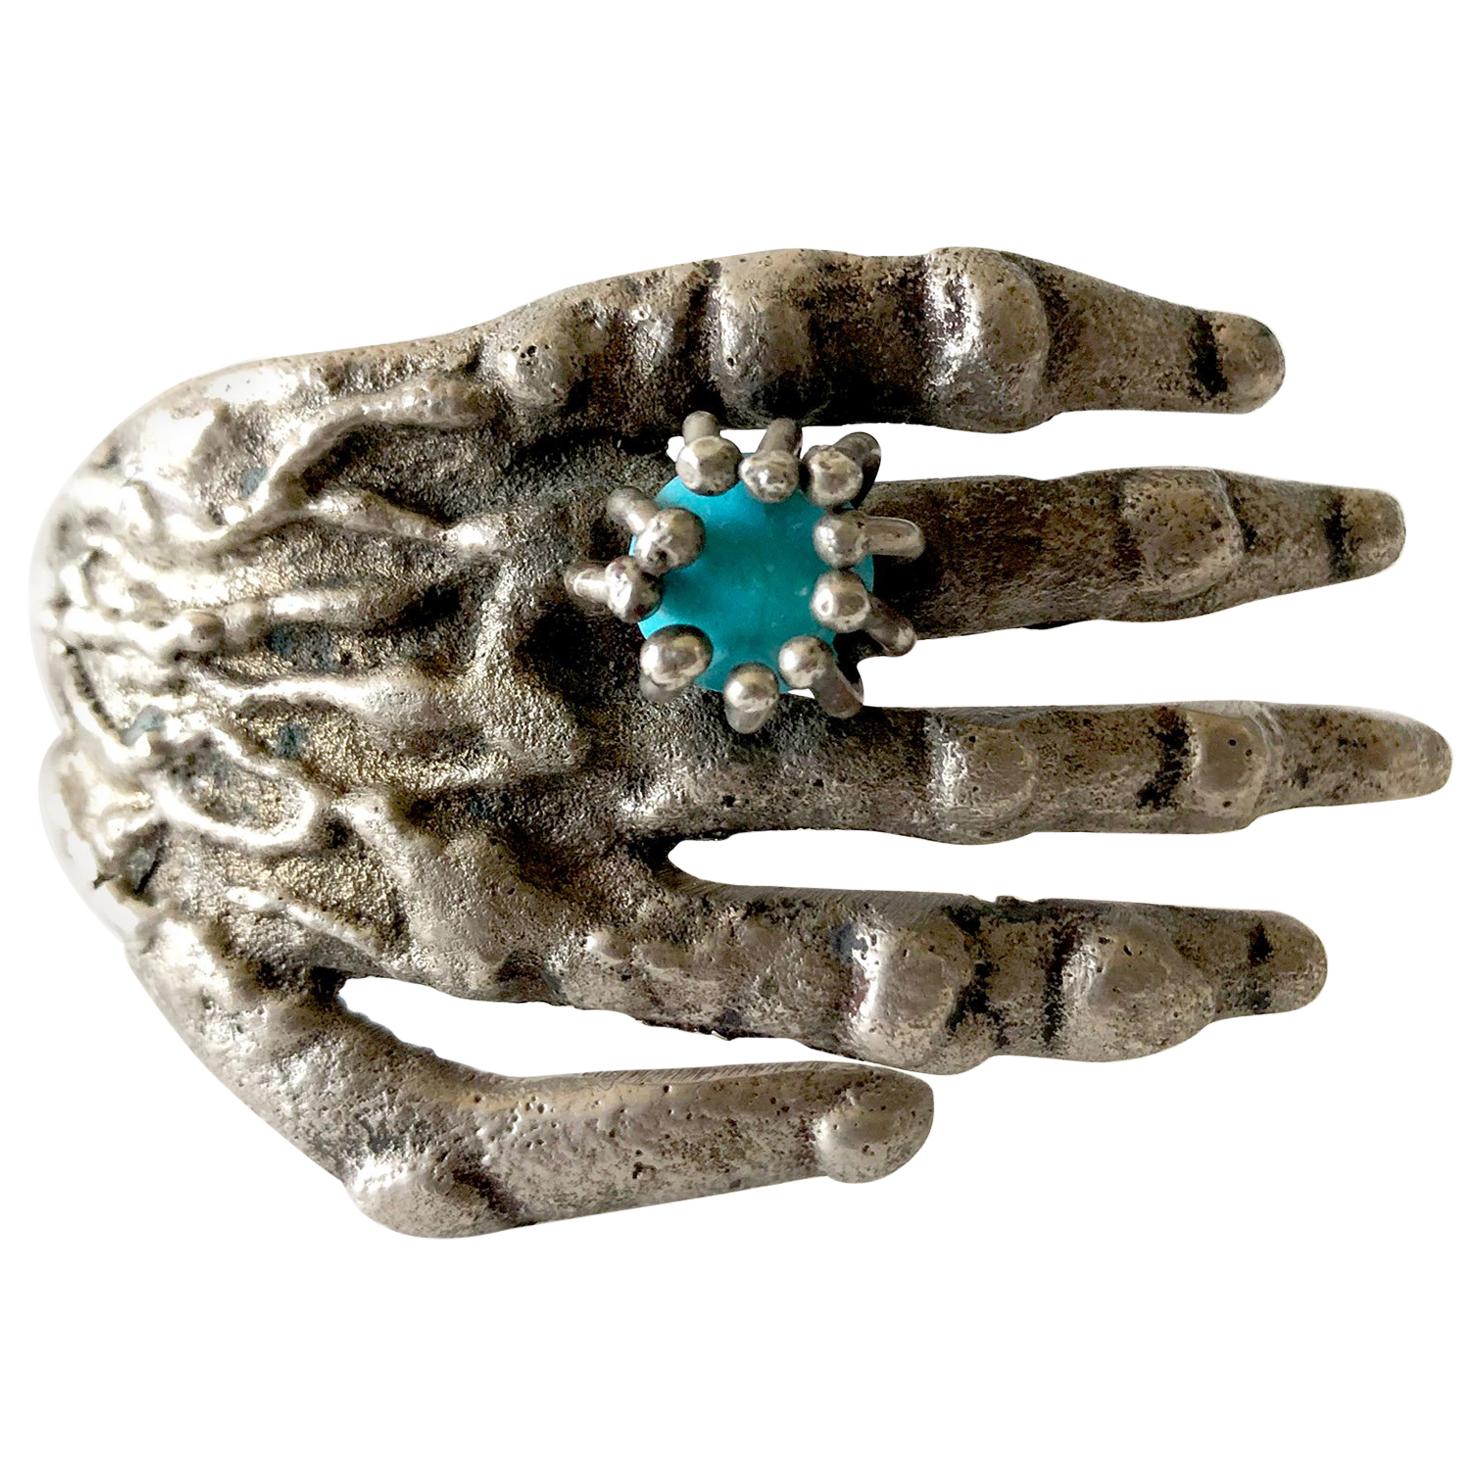 Pal Kepenyes Bronze Turquoise Mexican Surrealist Hand Cuff Bracelet